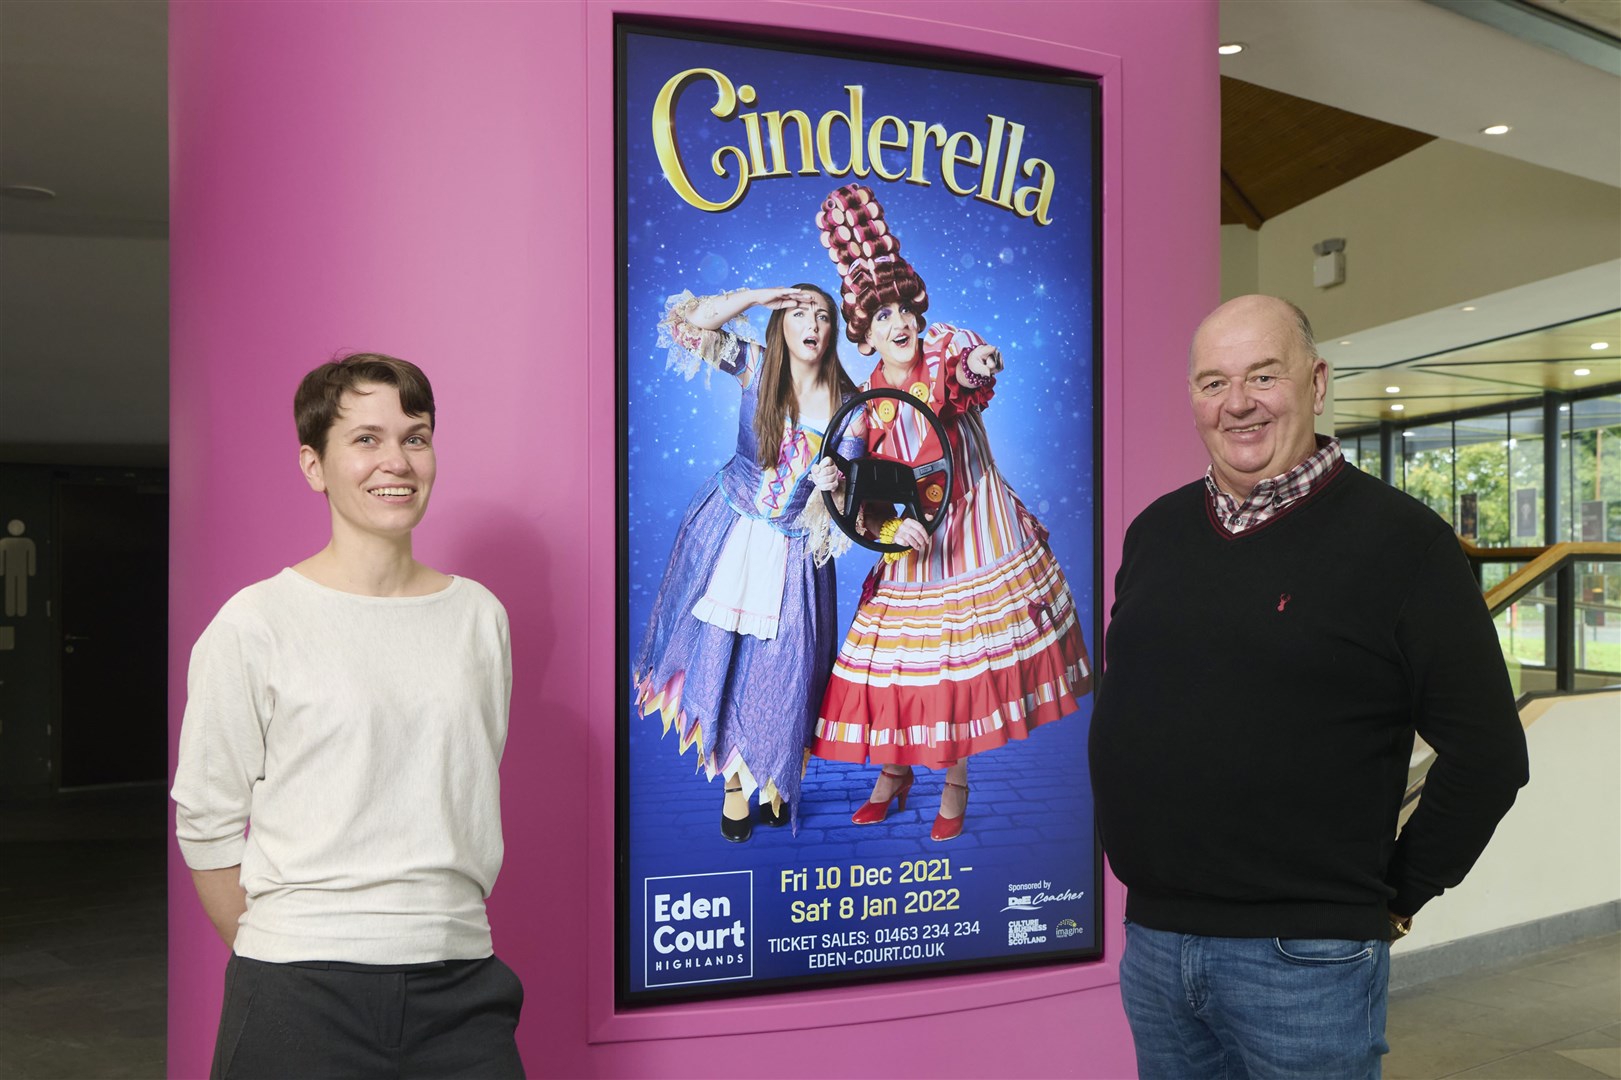 Eden Court fundraising manager Aelish O'Rourke and D&E managing director Donald Mathieson inspect a new plasma screen advert for the pantomime.